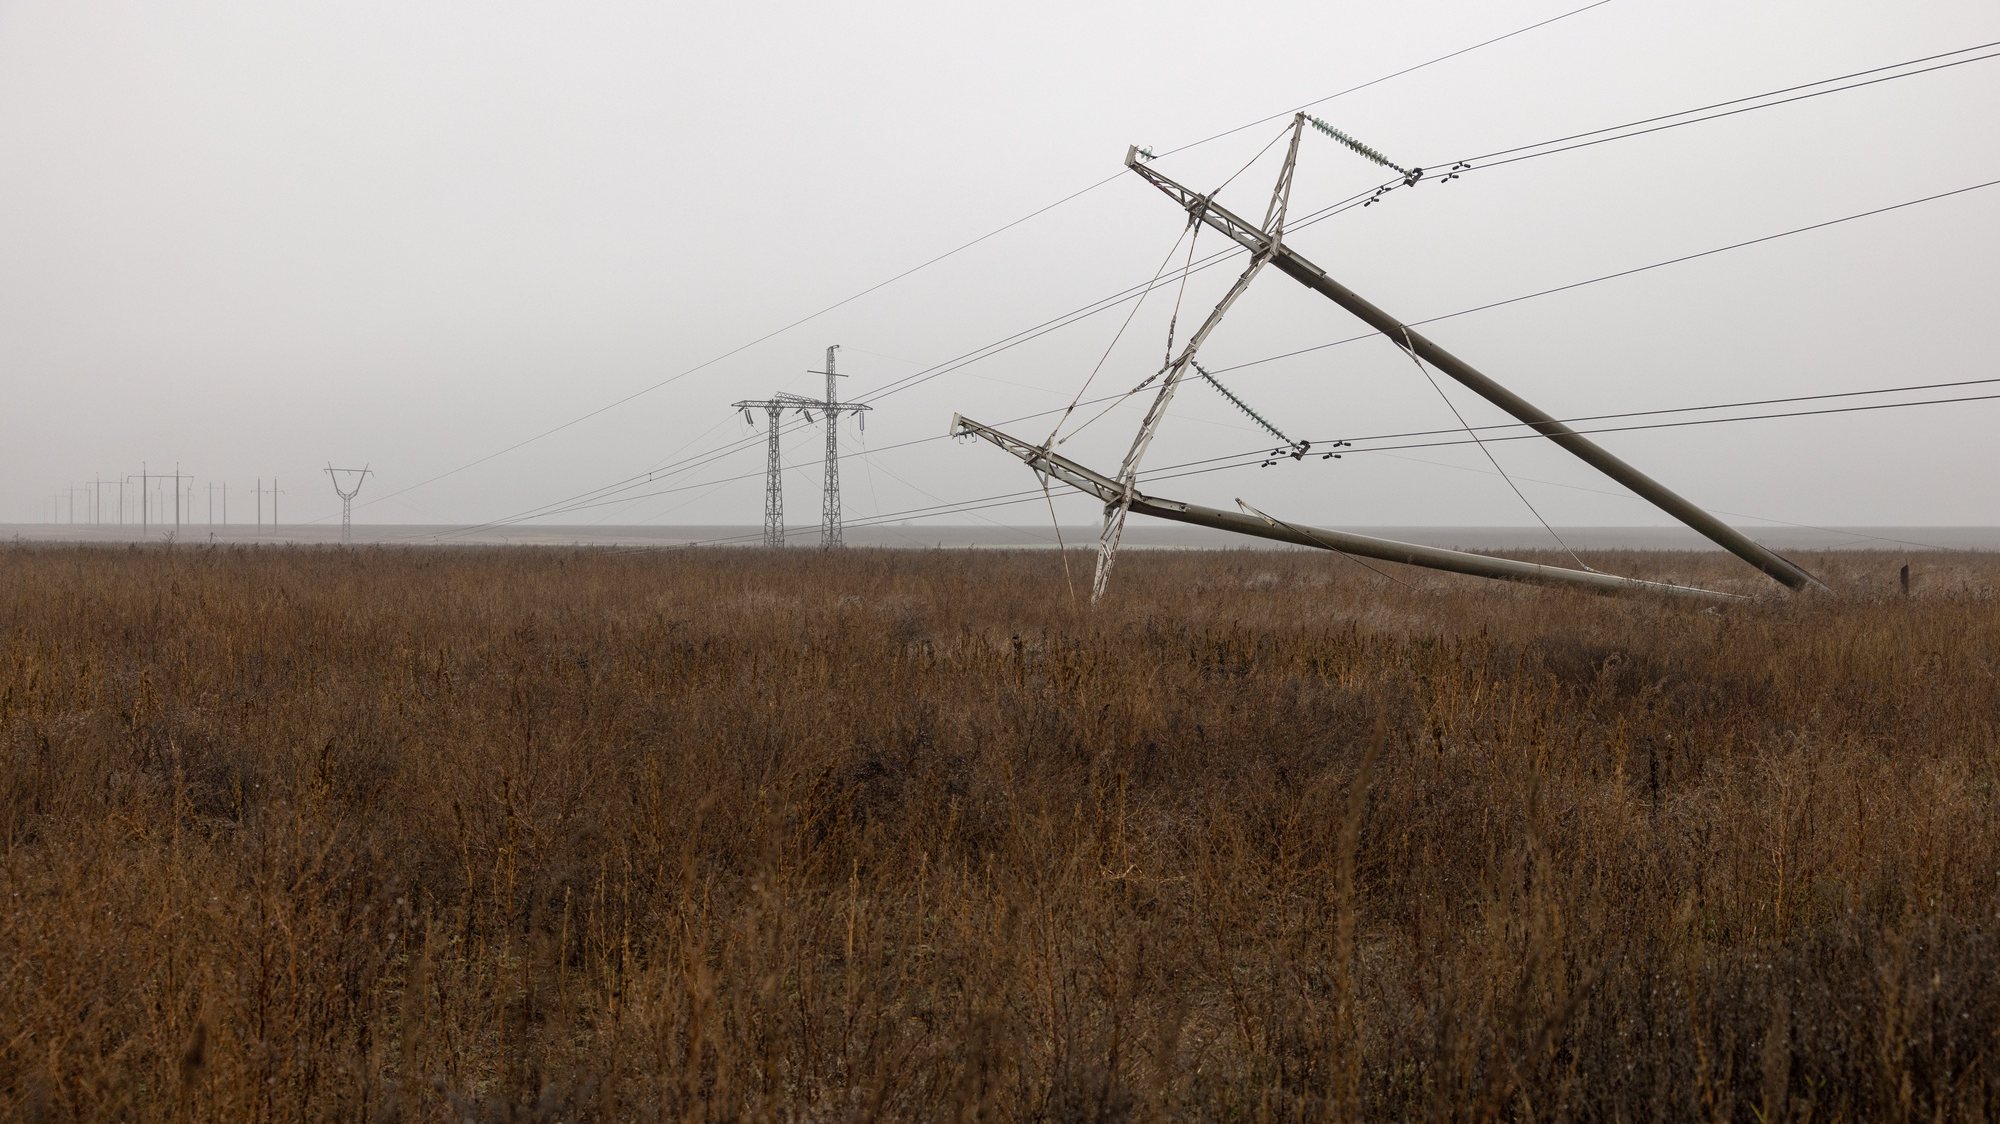 epa10331797 A damaged power line outside Kherson, southern Ukraine, 26 November 2022 (issued 27 November 2022). The Ukrainian president accused the Russian army of deliberately destroying critical infrastructure during their withdrawal from the city of Kherson, including electricity and water supplies. Ukrainian troops entered Kherson on 11 November after the Russian army had withdrawn from the city which they captured in the early stage of the conflict, shortly after Russian troops had entered Ukraine in February 2022.  EPA/ROMAN PILIPEY